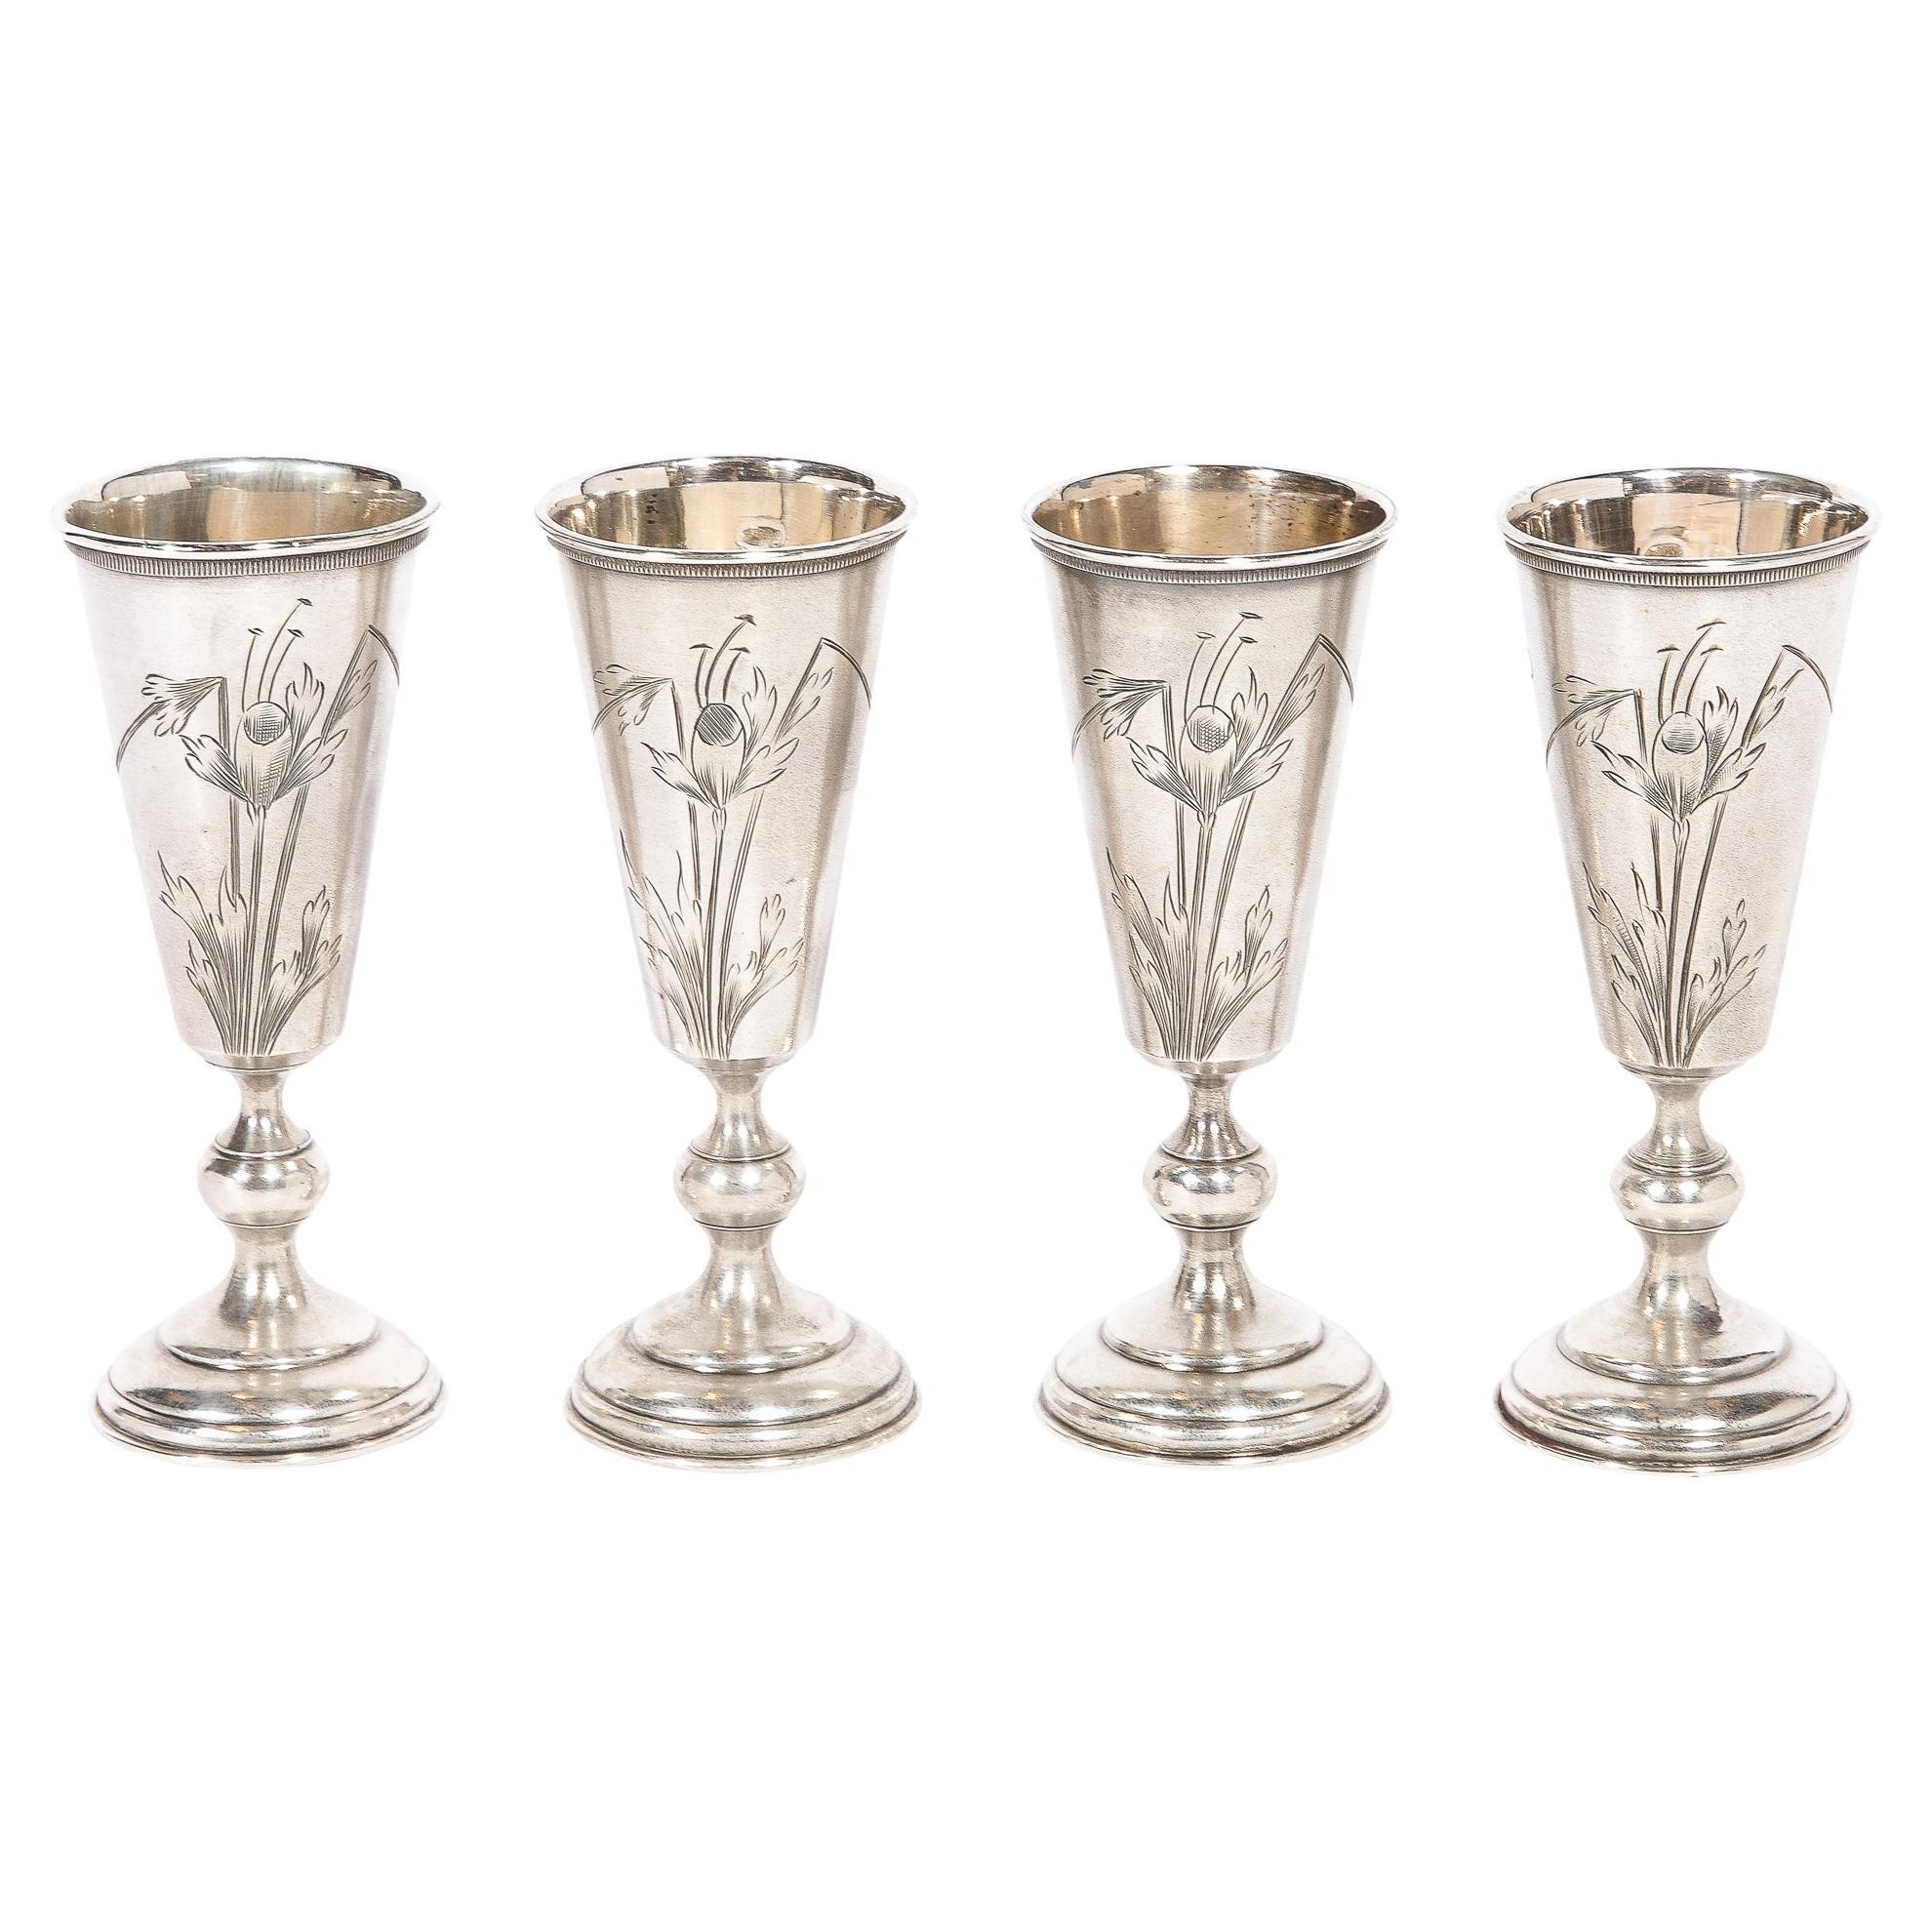 Set of 4 Antique Sterling Silver Russian Kiddish Cups With Kokoshnik Stamp 